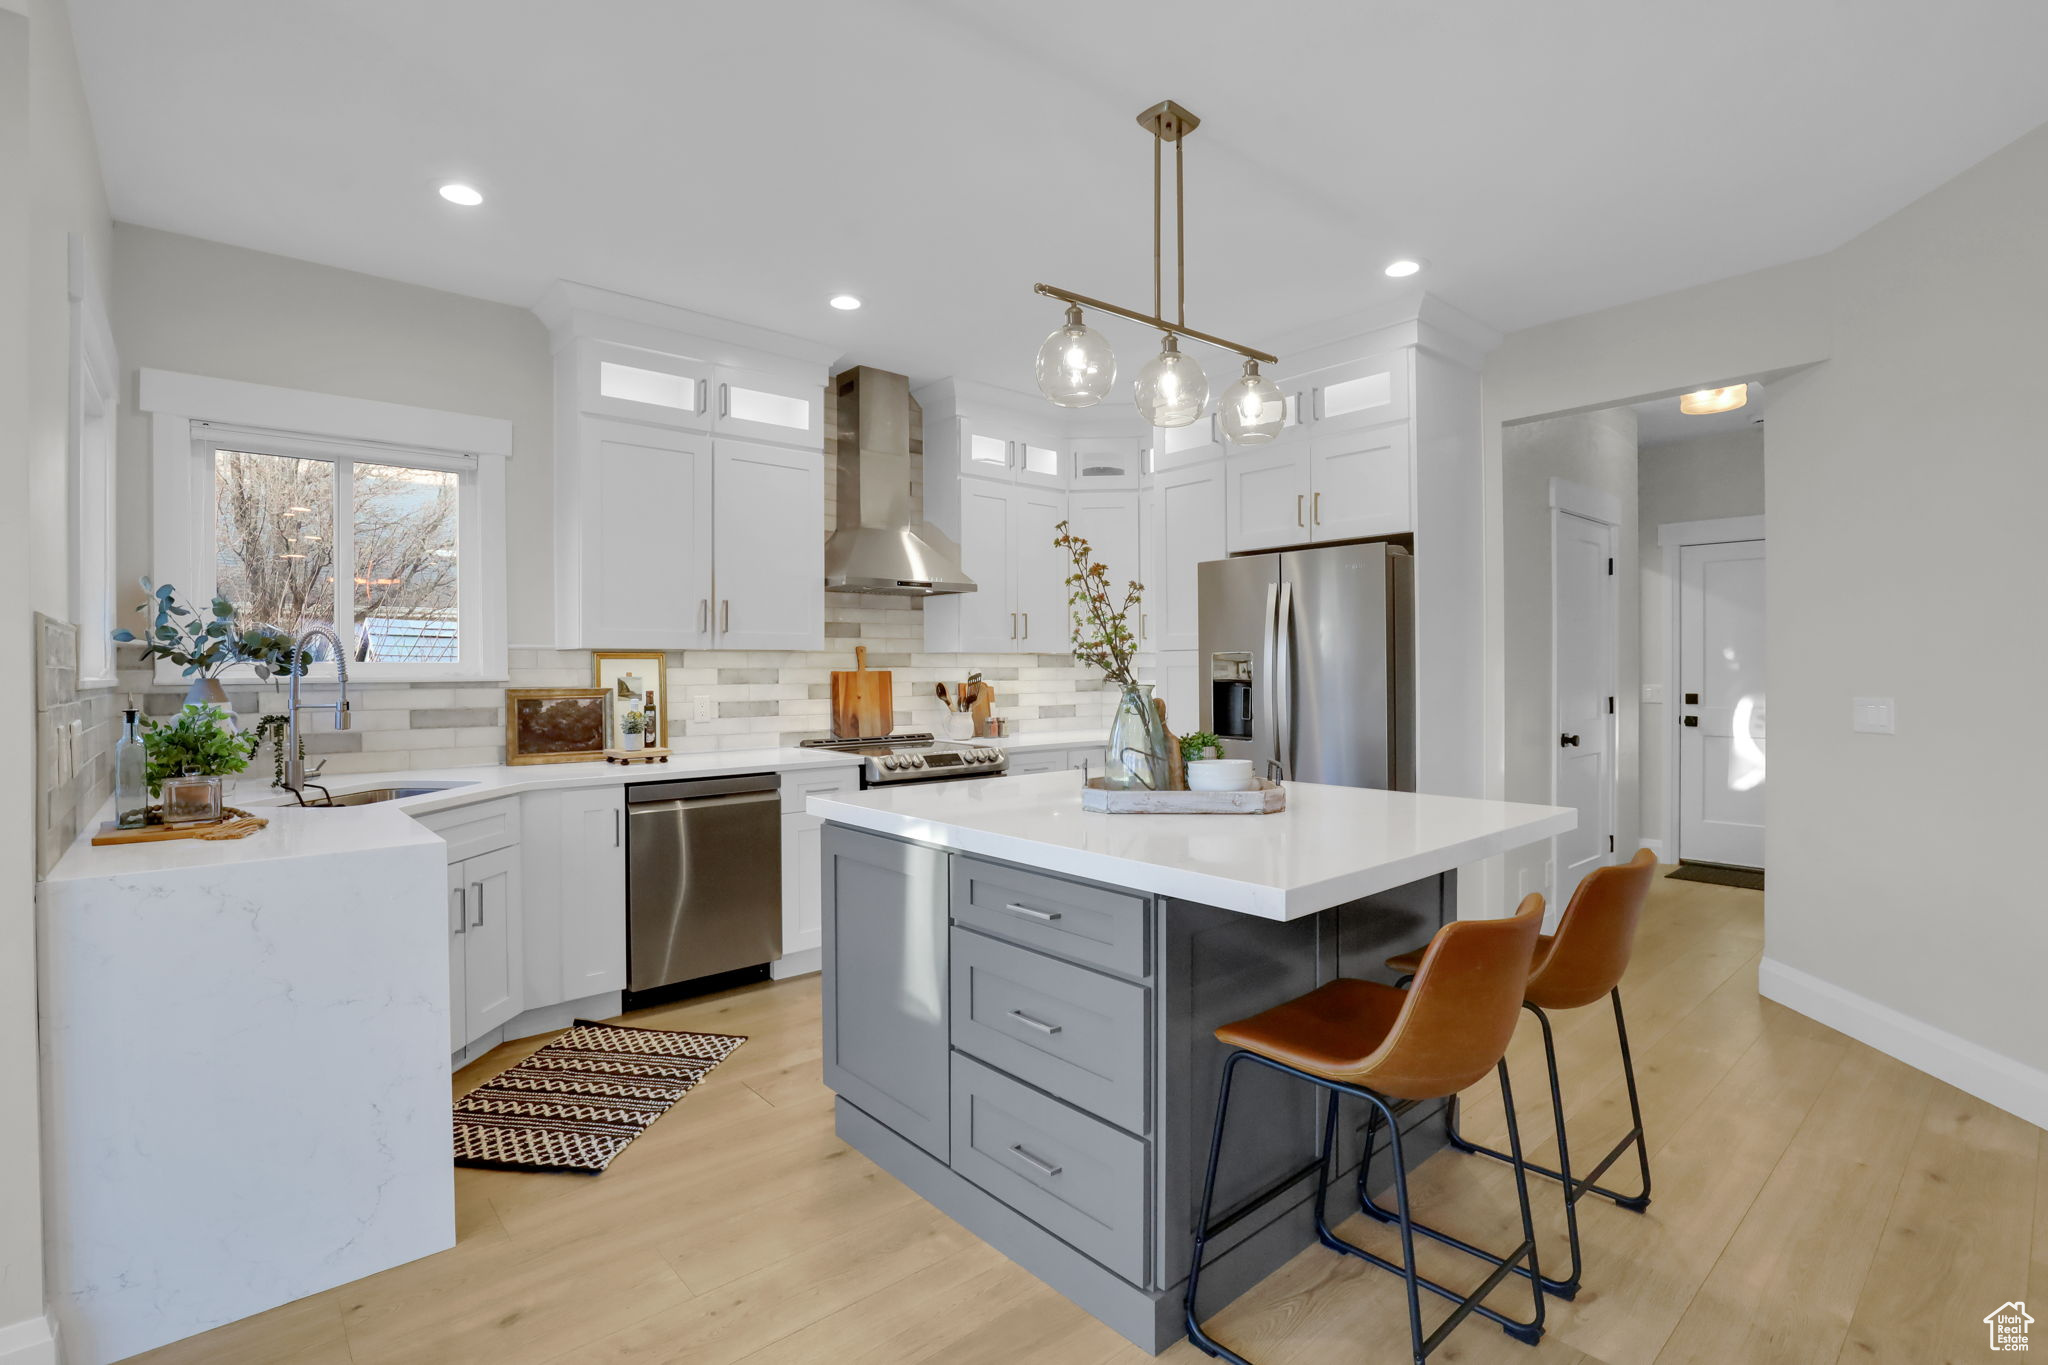 Kitchen featuring light wood-type flooring, a center island, decorative light fixtures, wall chimney exhaust hood, and appliances with stainless steel finishes